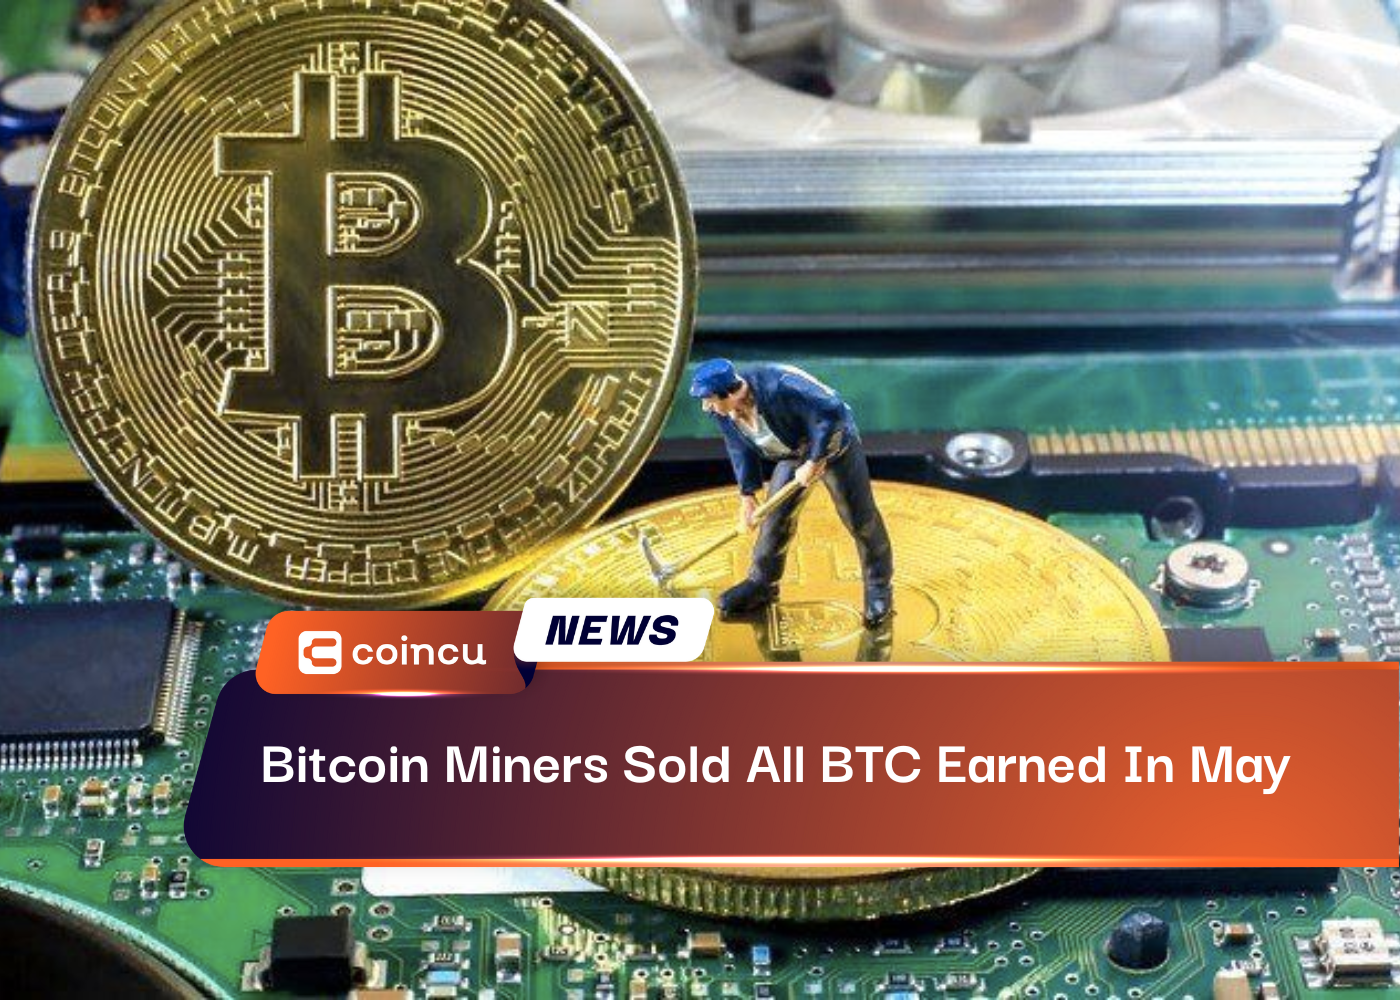 Bitcoin Miners Sold All BTC Earned In May